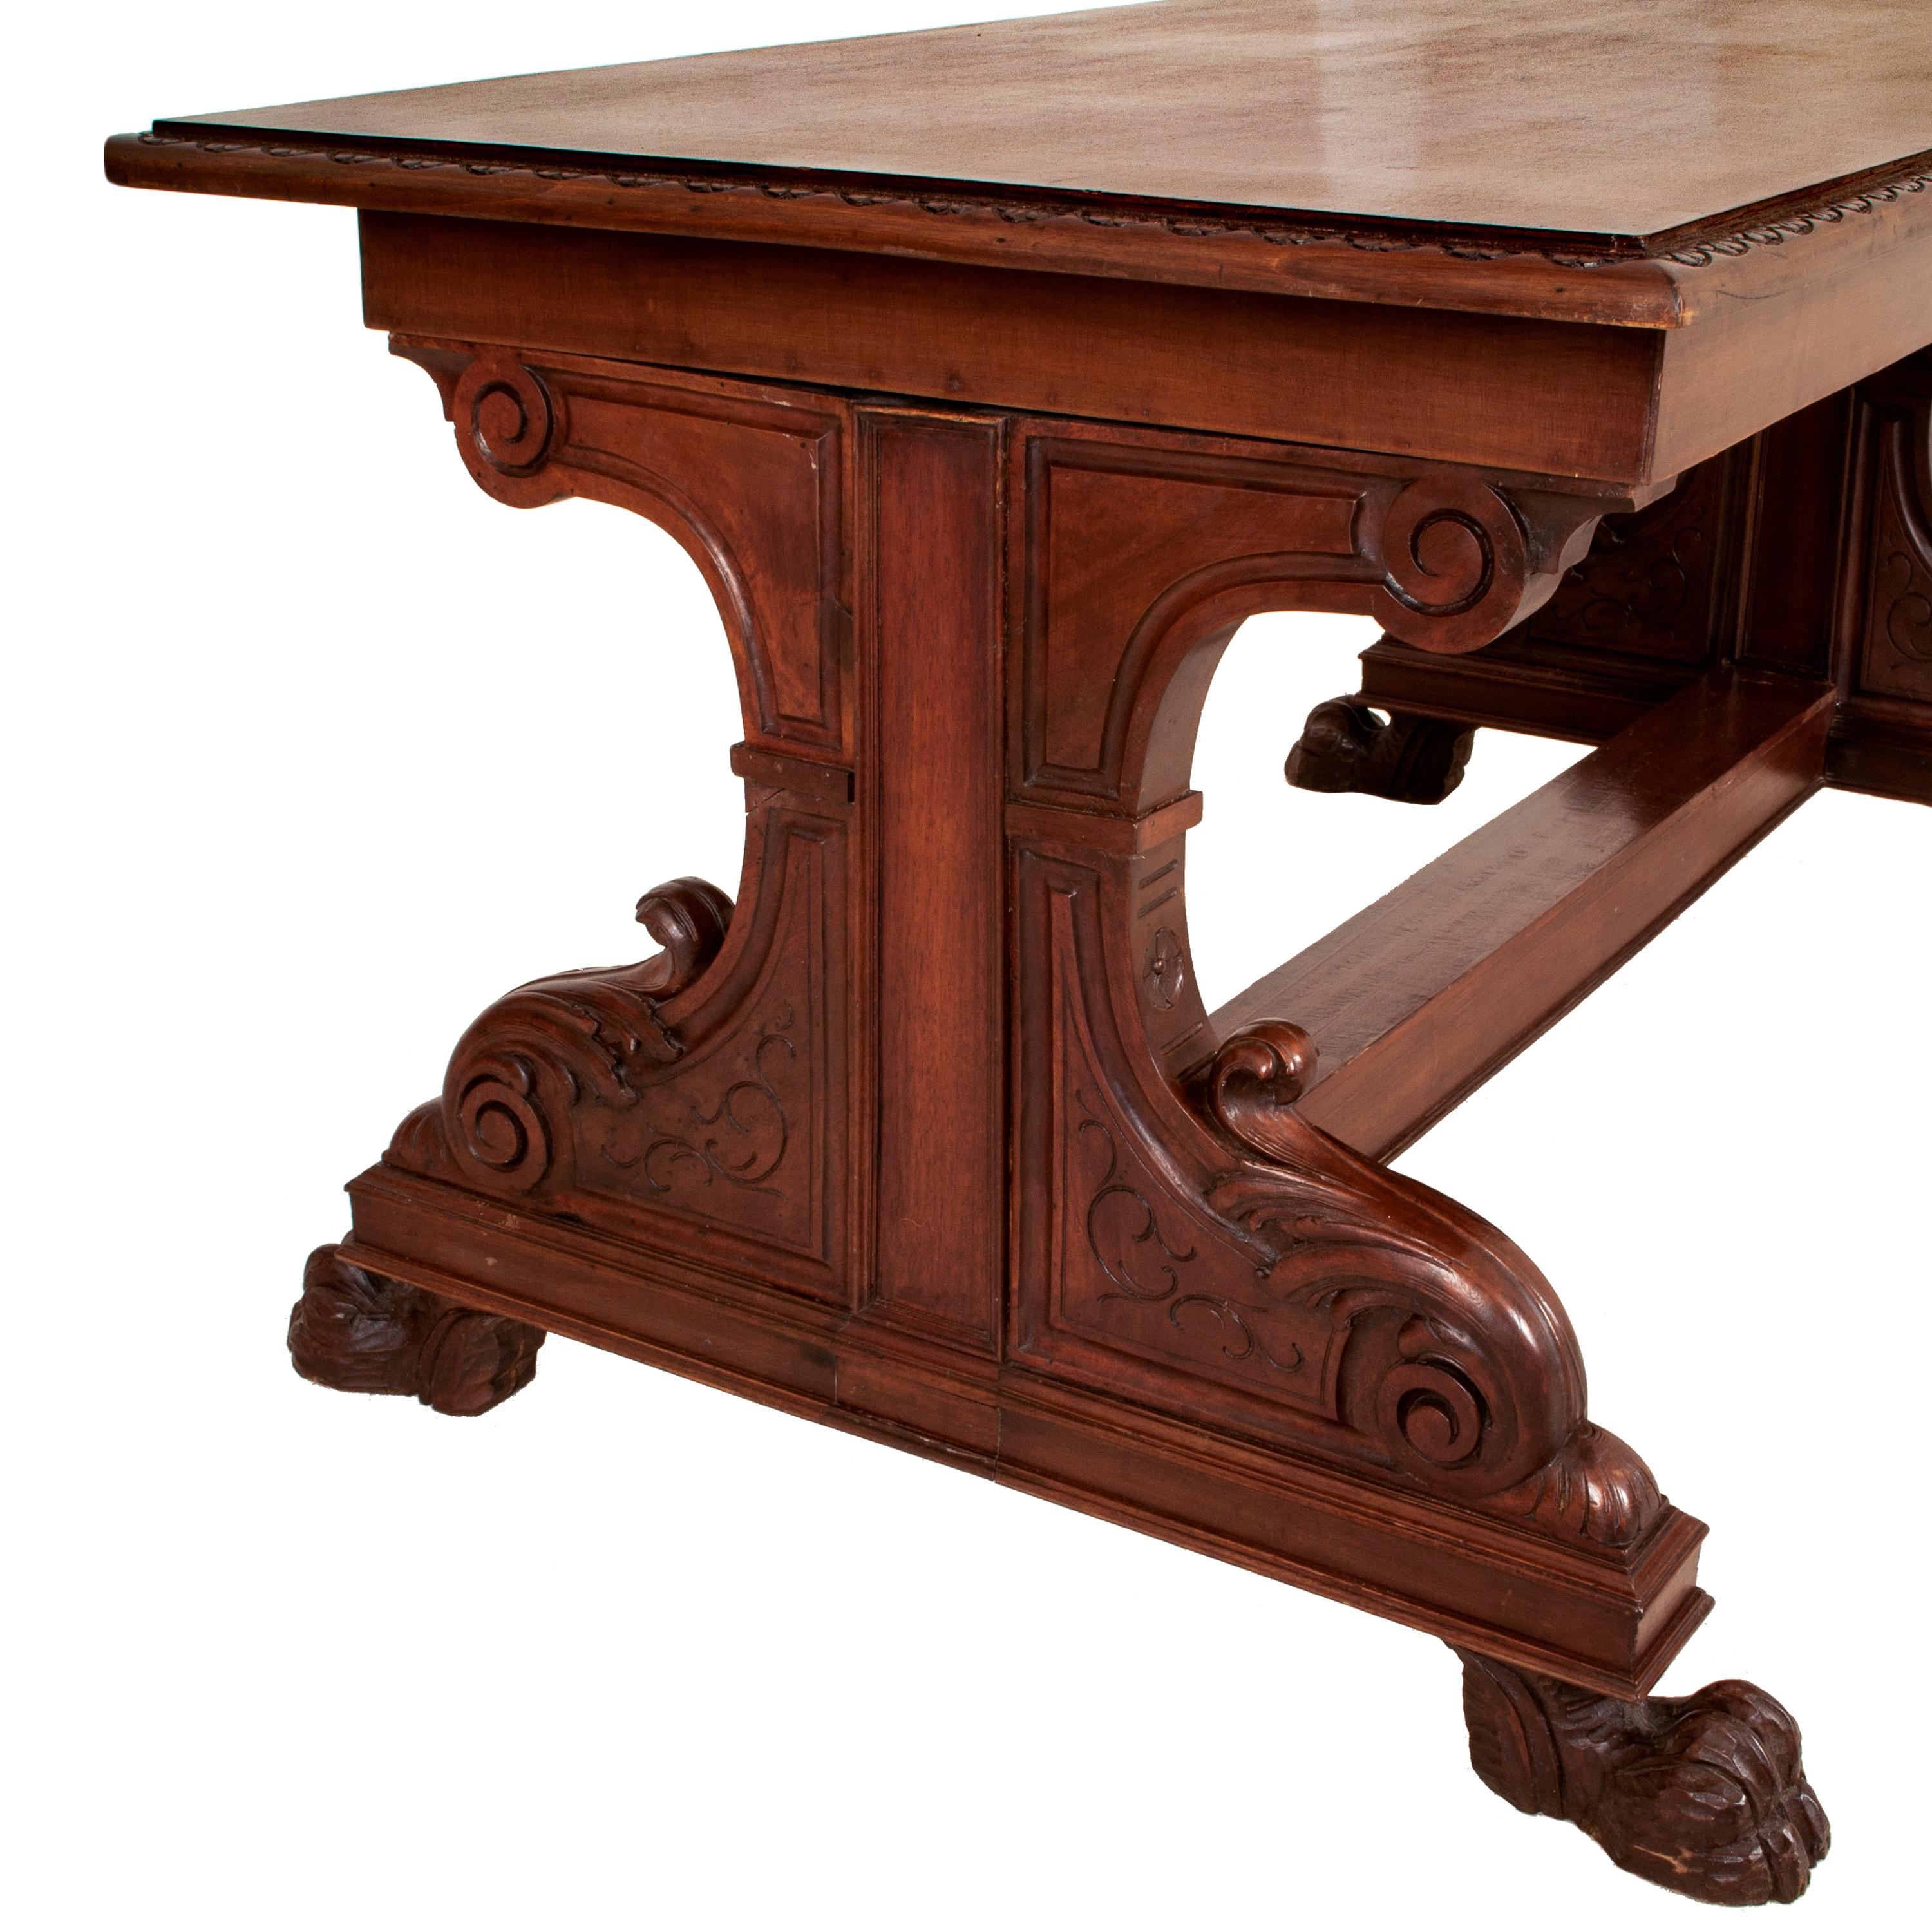 Antique Italian Carved Walnut Renaissance Revival Library Serving Table, 1870 For Sale 2